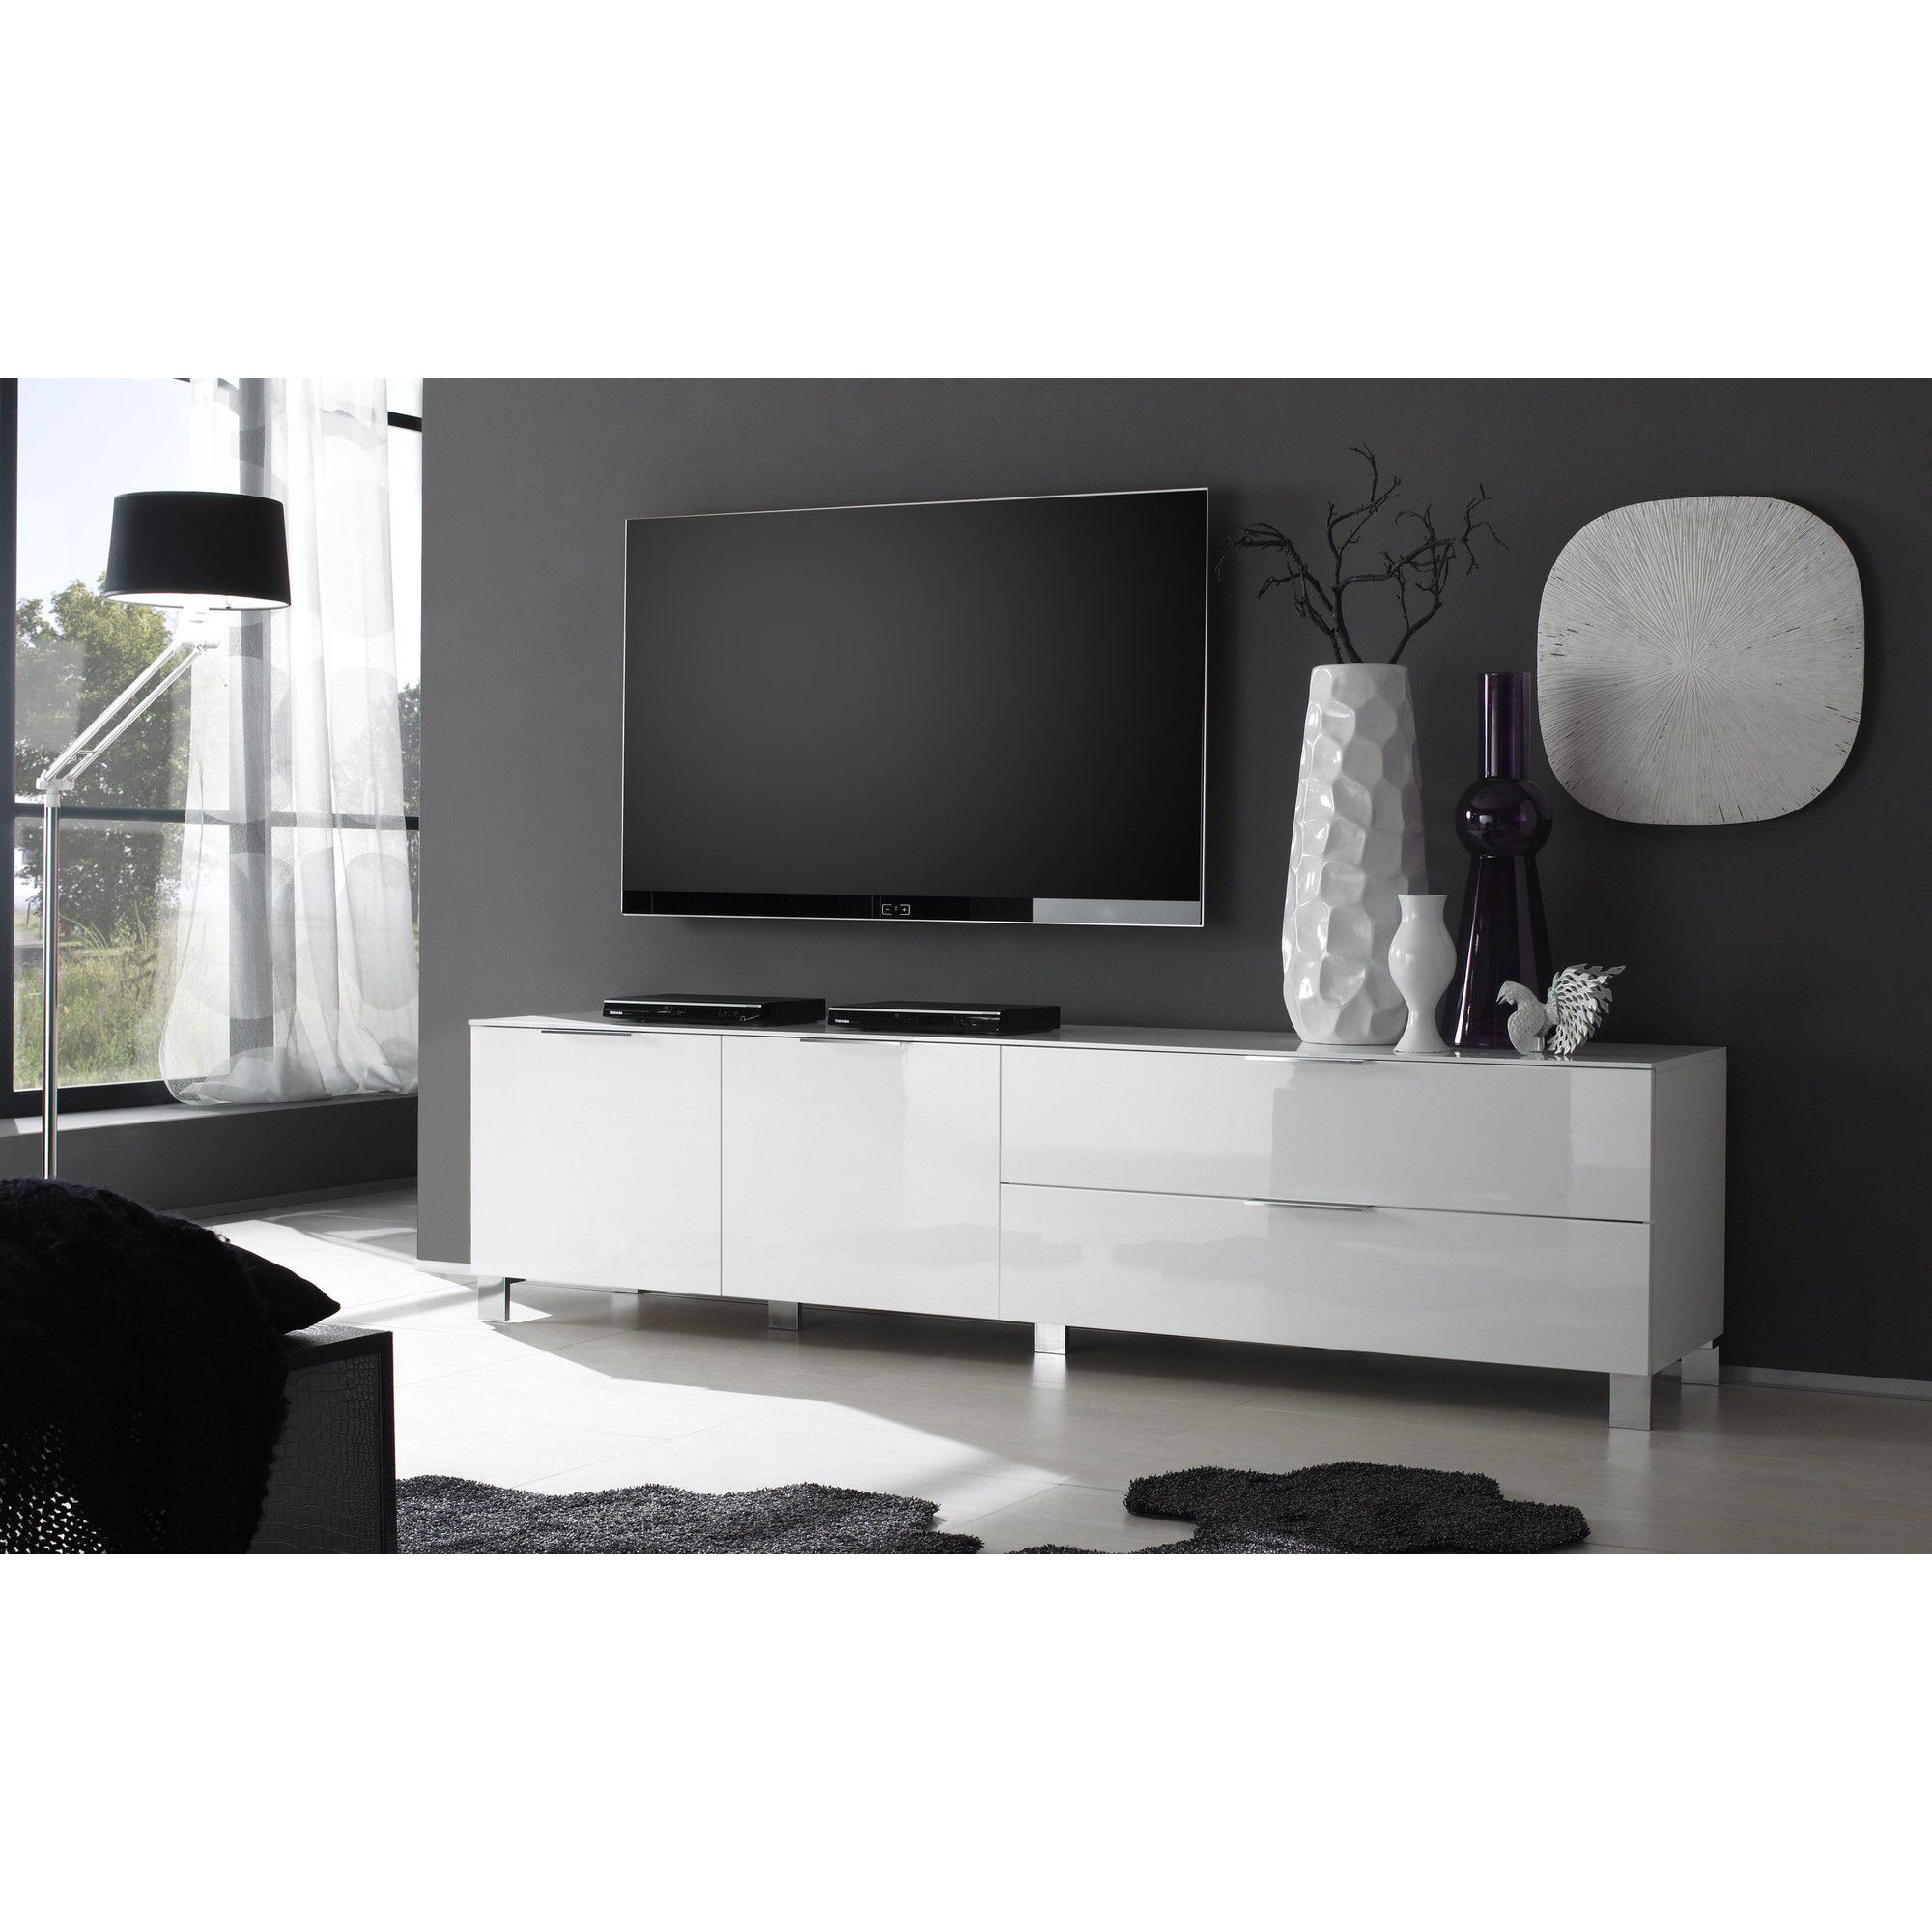 Without LED Body White Mat/Fronts White High Gloss TV Unit Cabinet TV Stand Entertainment Lowboard Luna 140 cm 